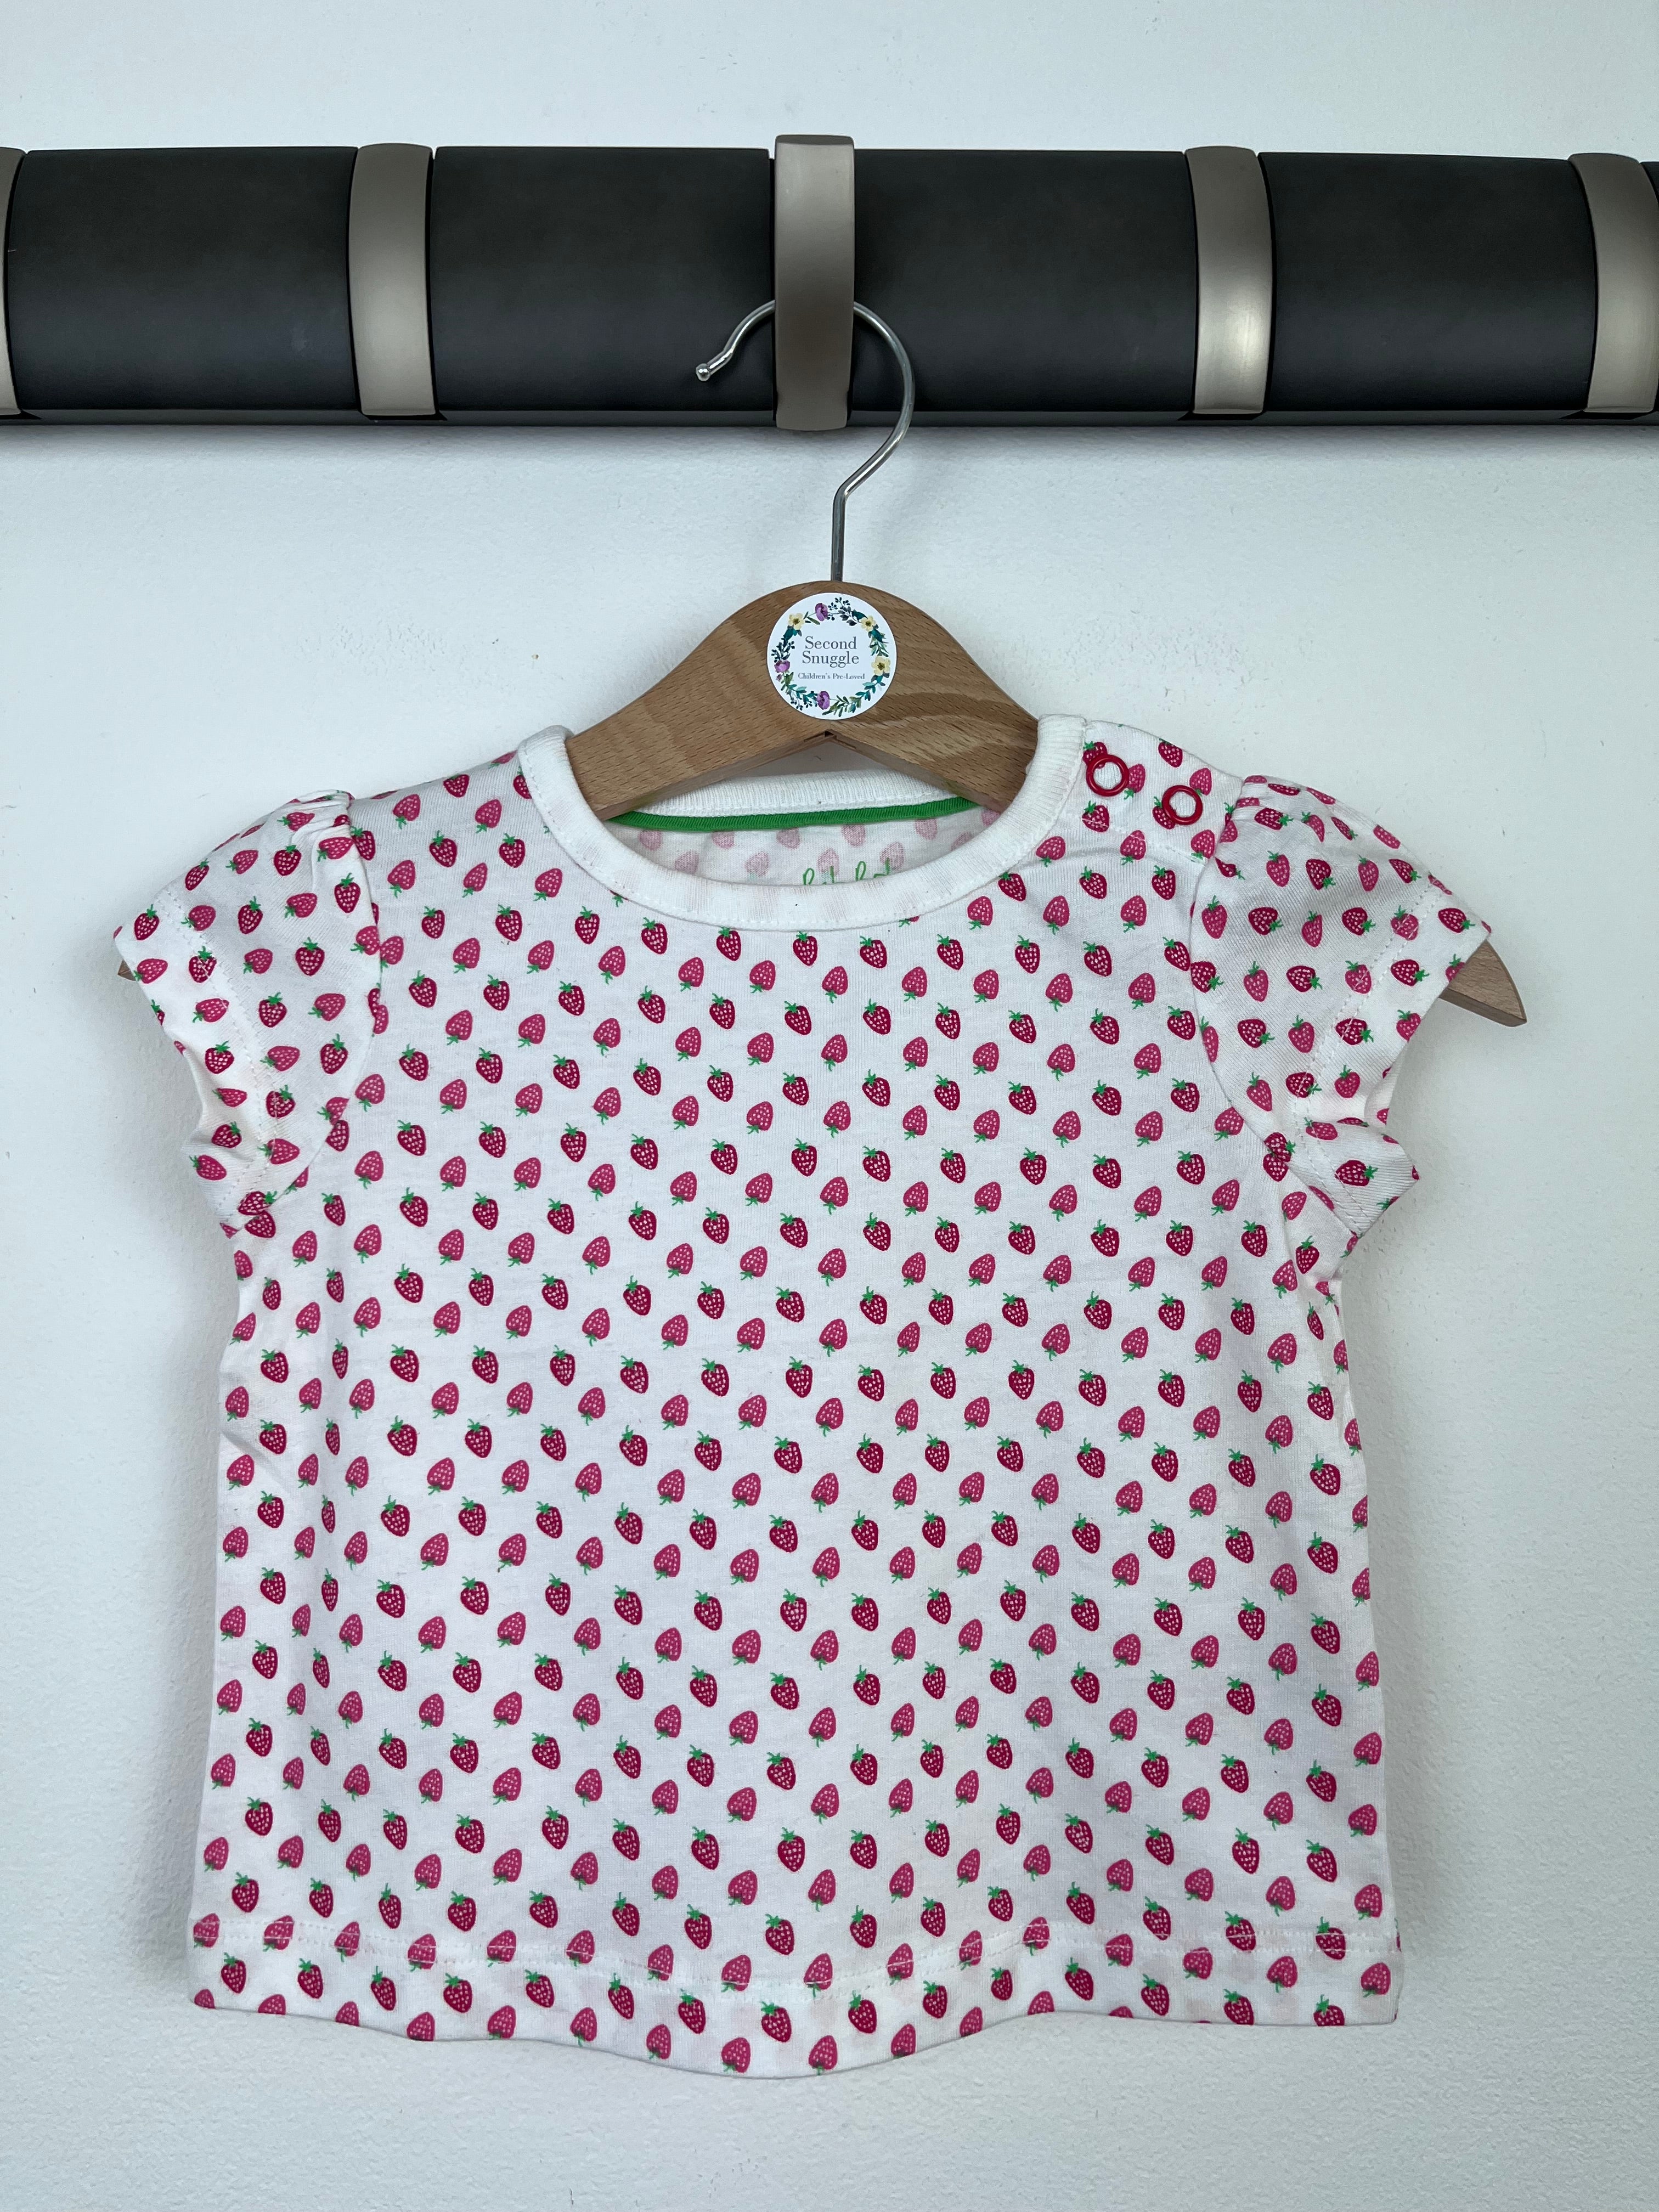 Baby Boden 0-3 Months-Tops-Second Snuggle Preloved